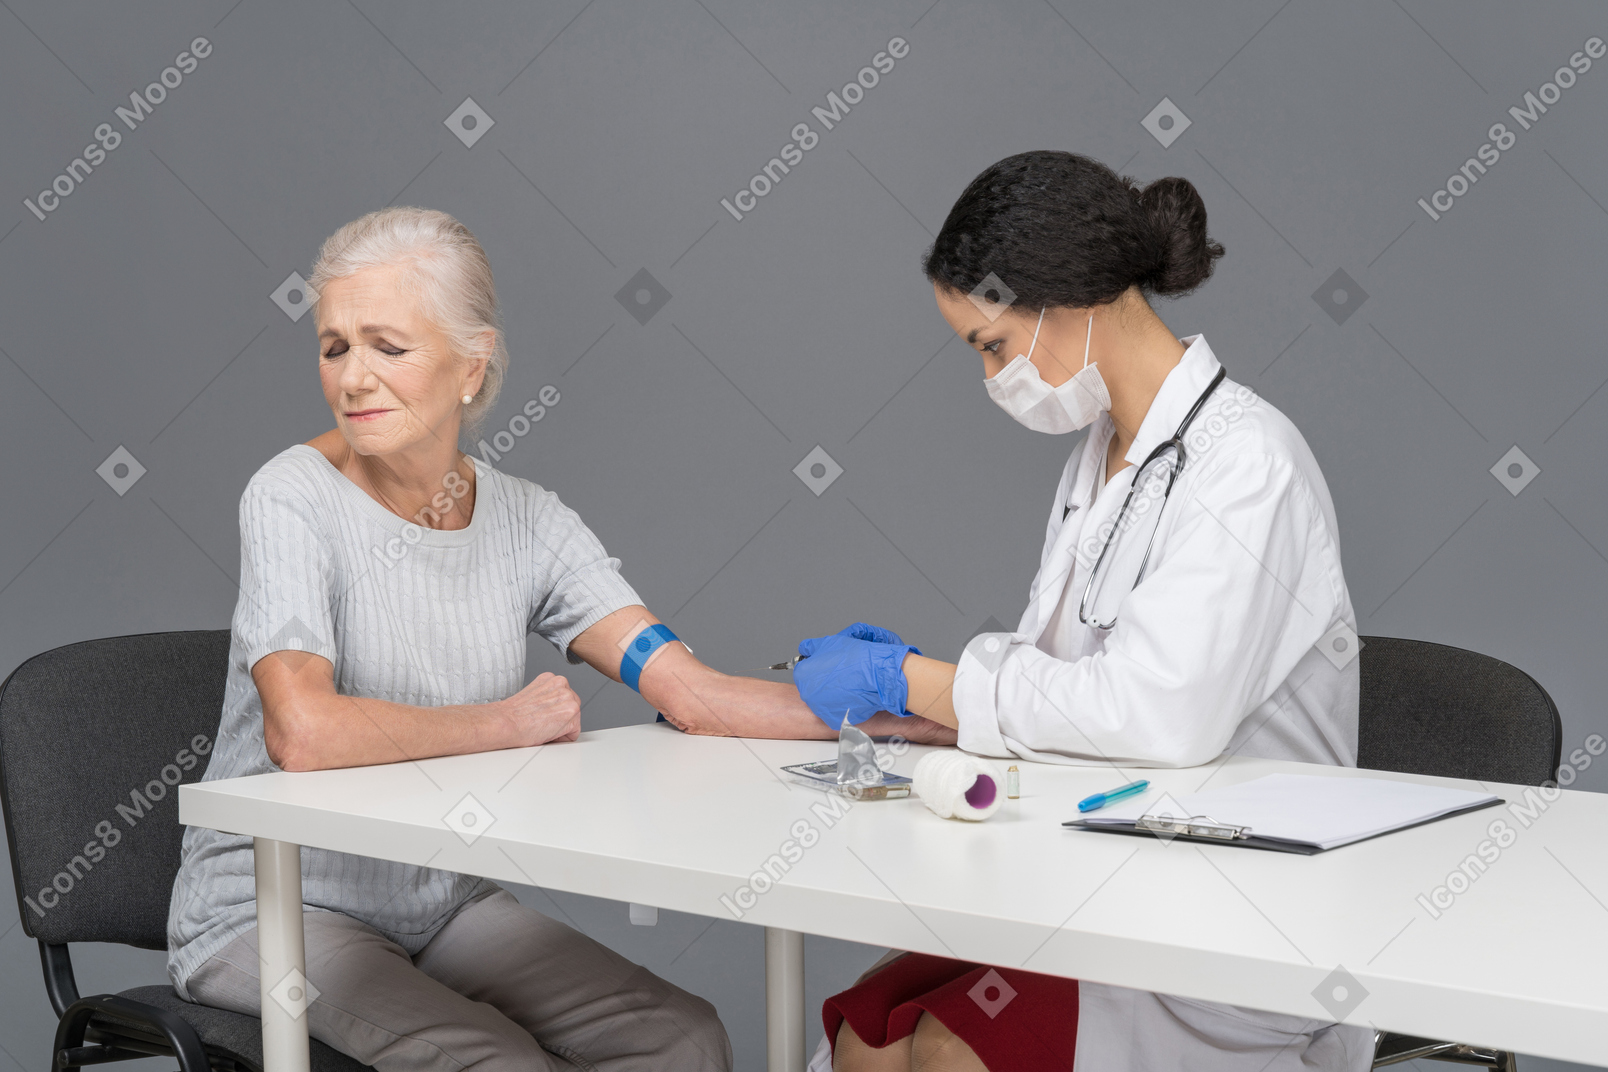 Elder woman looks away as doctor makes her injection